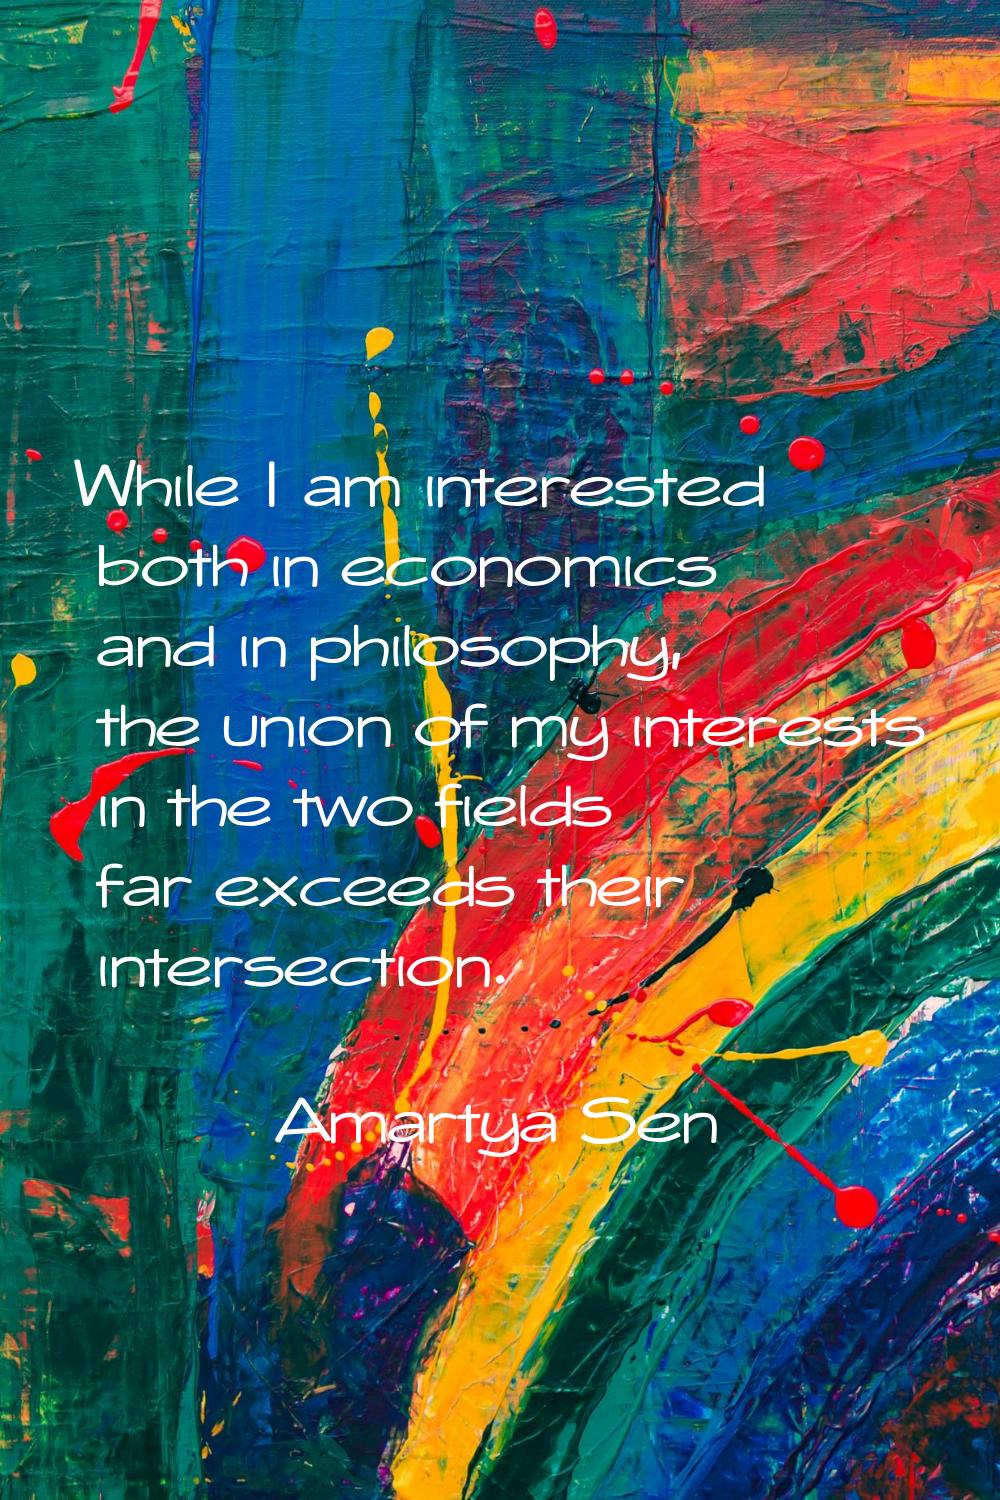 While I am interested both in economics and in philosophy, the union of my interests in the two fie